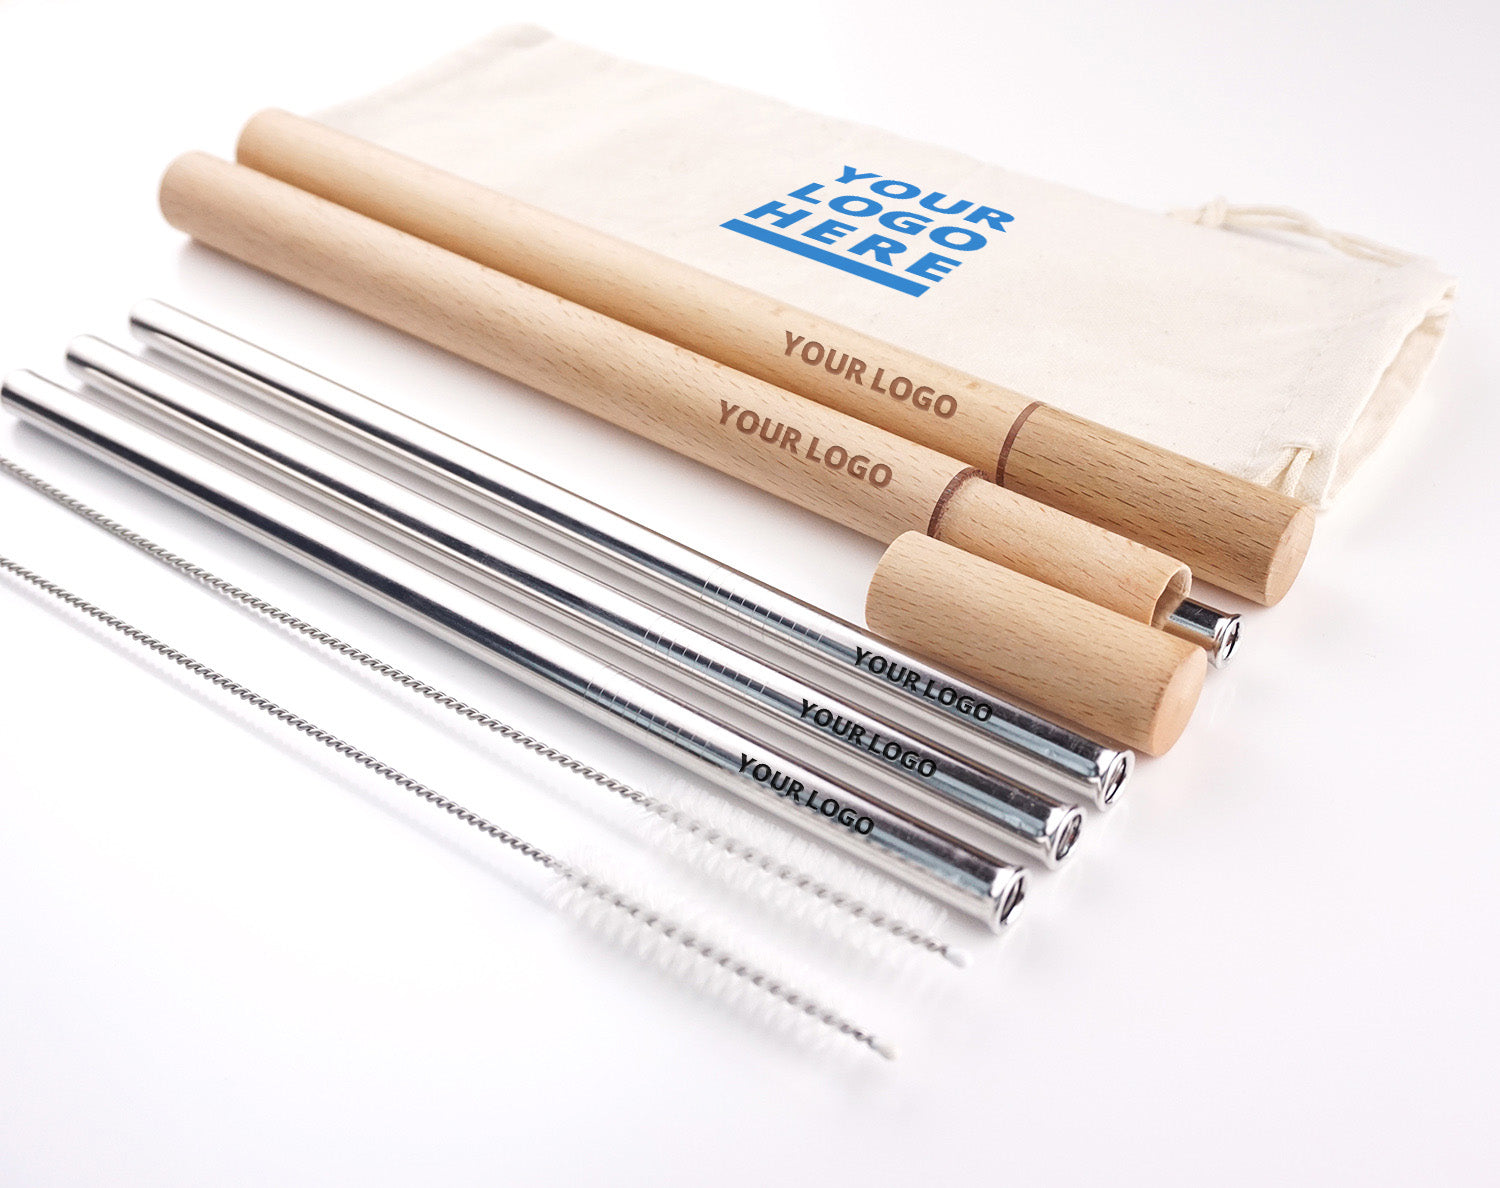 https://cdn.shopify.com/s/files/1/0075/6950/6363/products/Reusable_Stainless_Steel_Metal_Straws_1.jpg?v=1544153179&width=1500